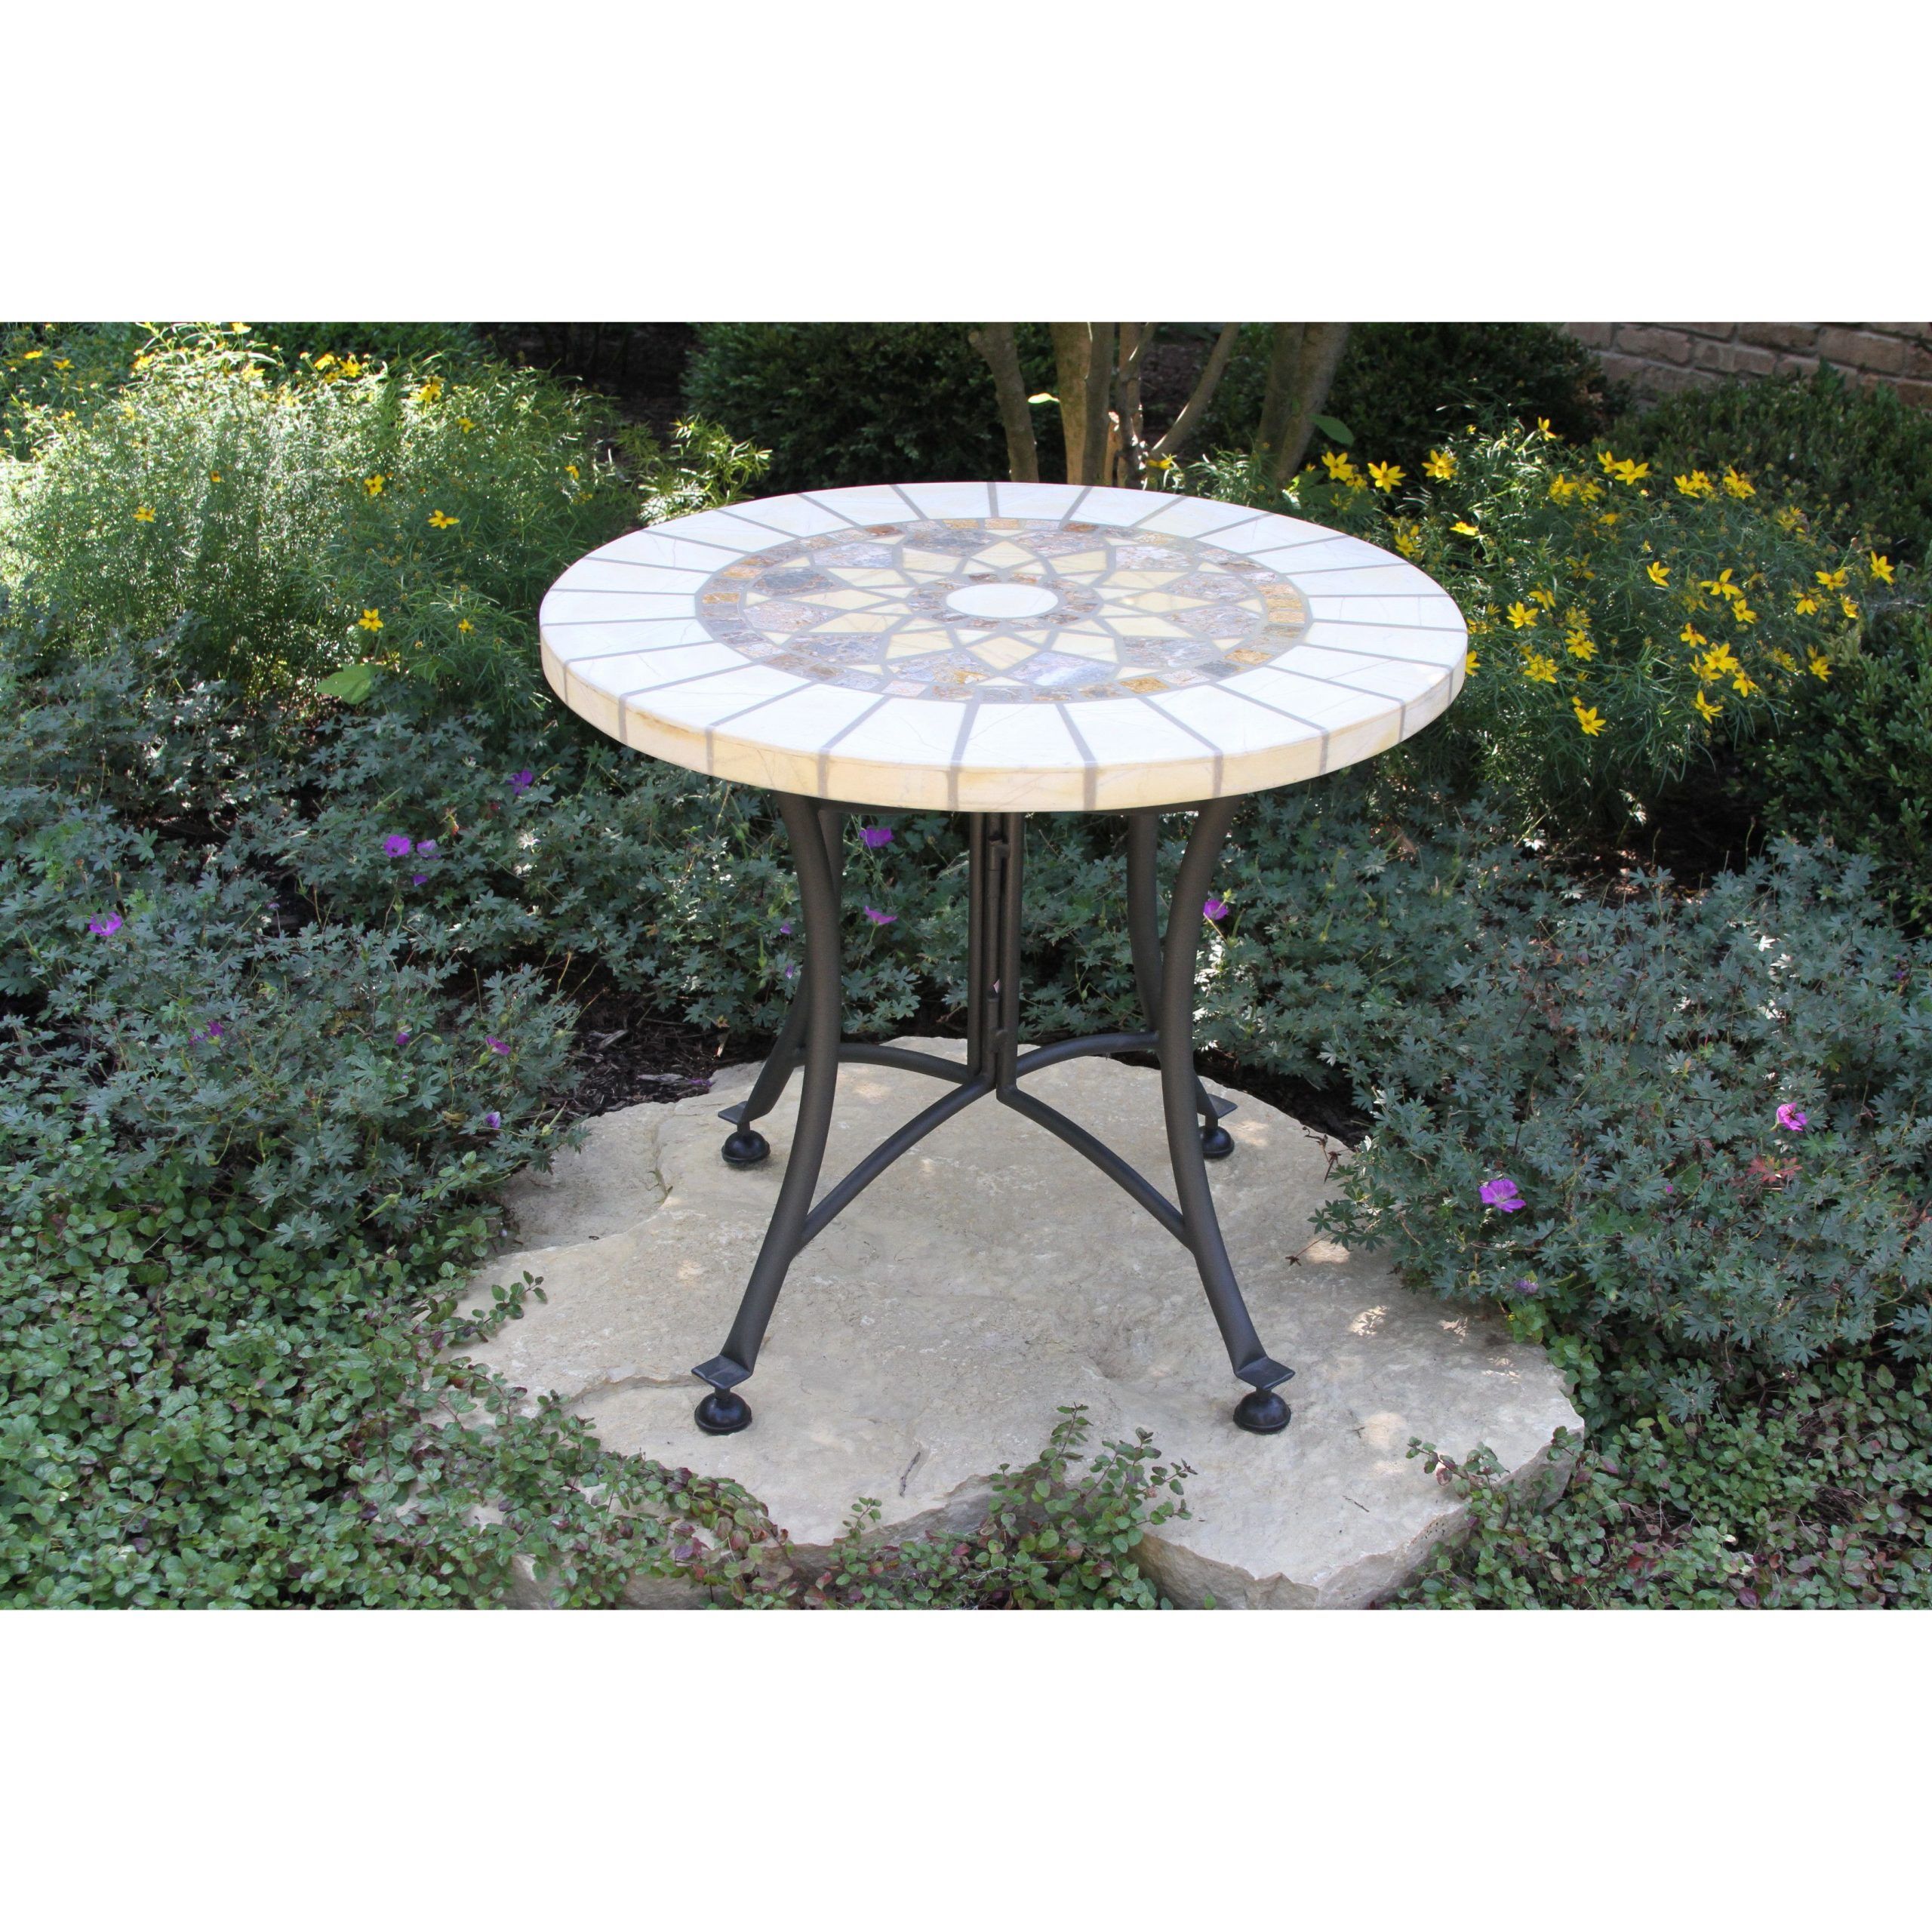 Outdoor Accent Table, Mosaic Accent Inside Sunburst Mosaic Outdoor Accent Tables (View 7 of 15)